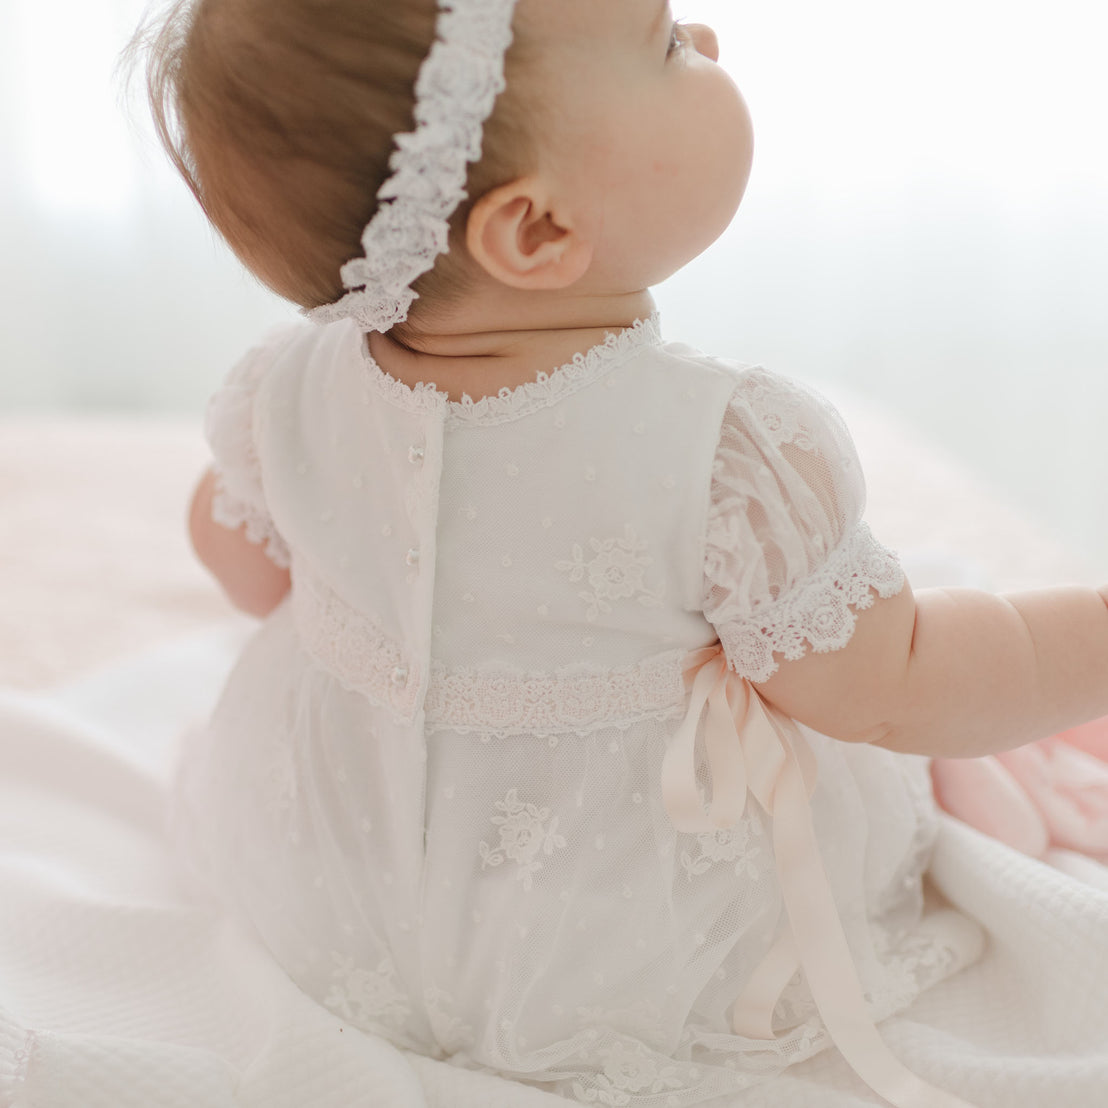 A baby dressed in a white Melissa Christening Gown & Bonnet with Venice lace trim and embroidered details sits on a white blanket. The baby's back is towards the camera, showcasing the delicate lace and buttons on the gown. The scene is softly lit with a blurred background.